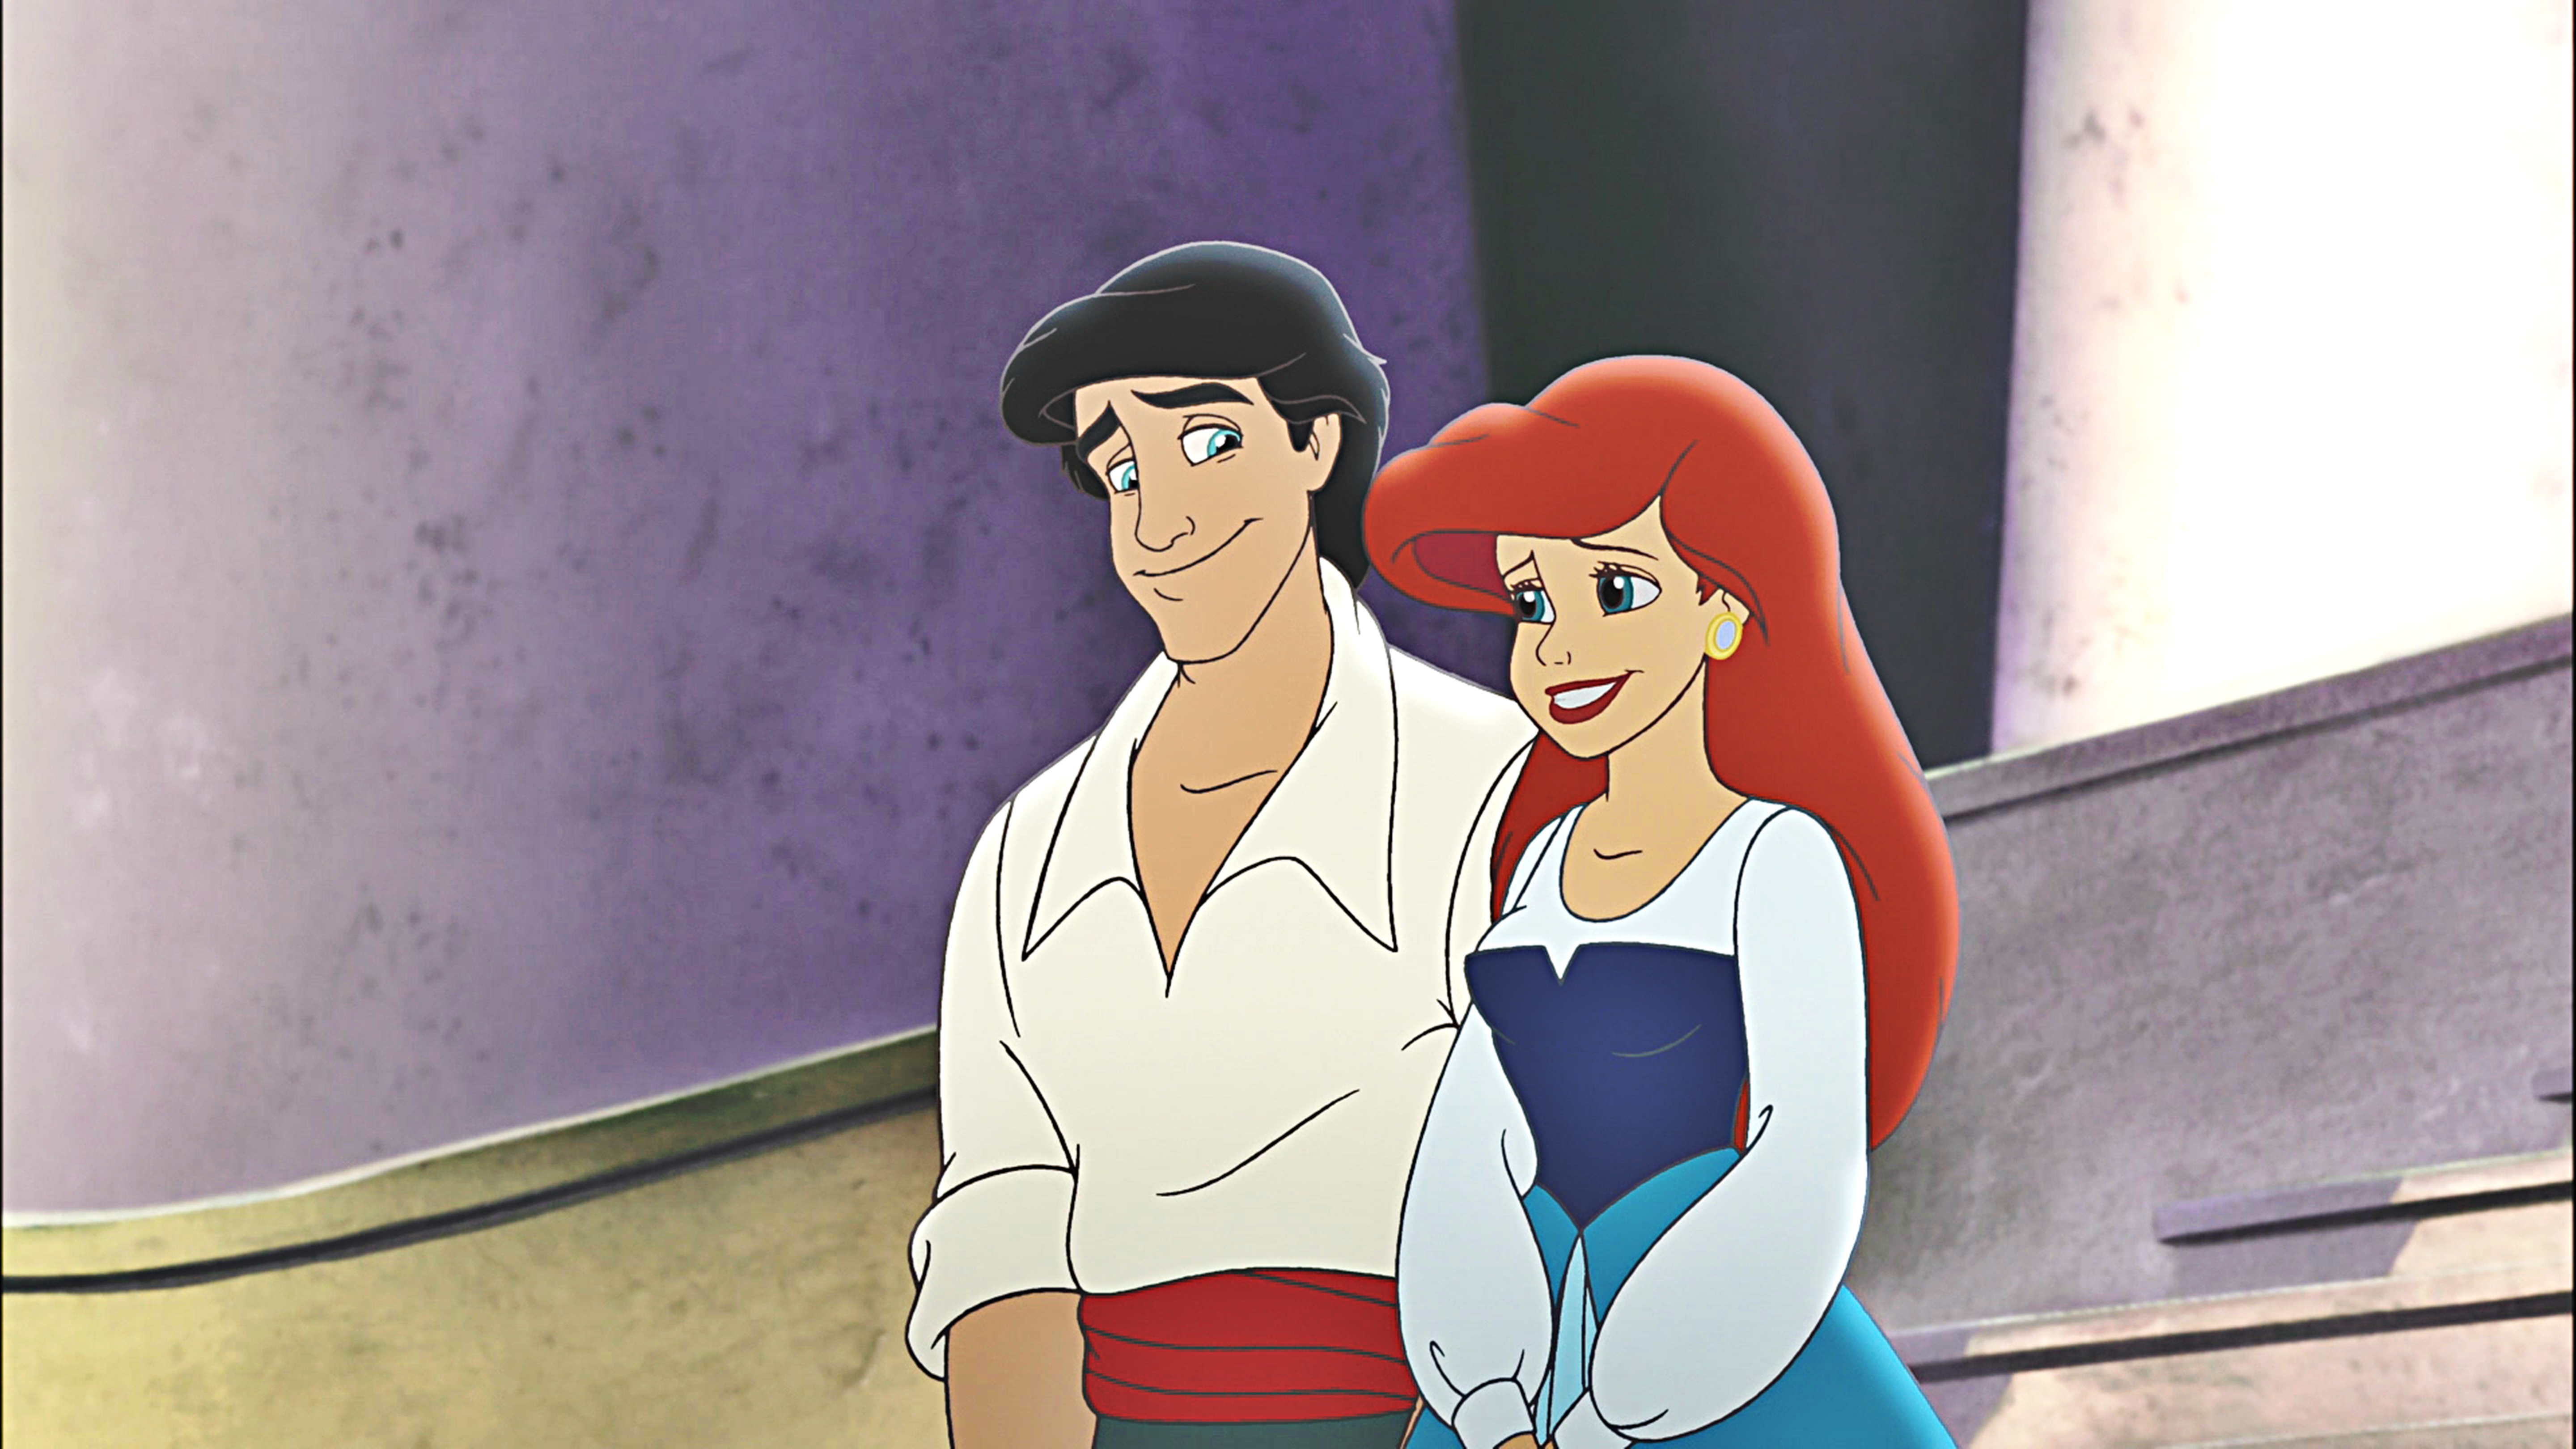 Prince Eric from The Little Mermaid - wide 10